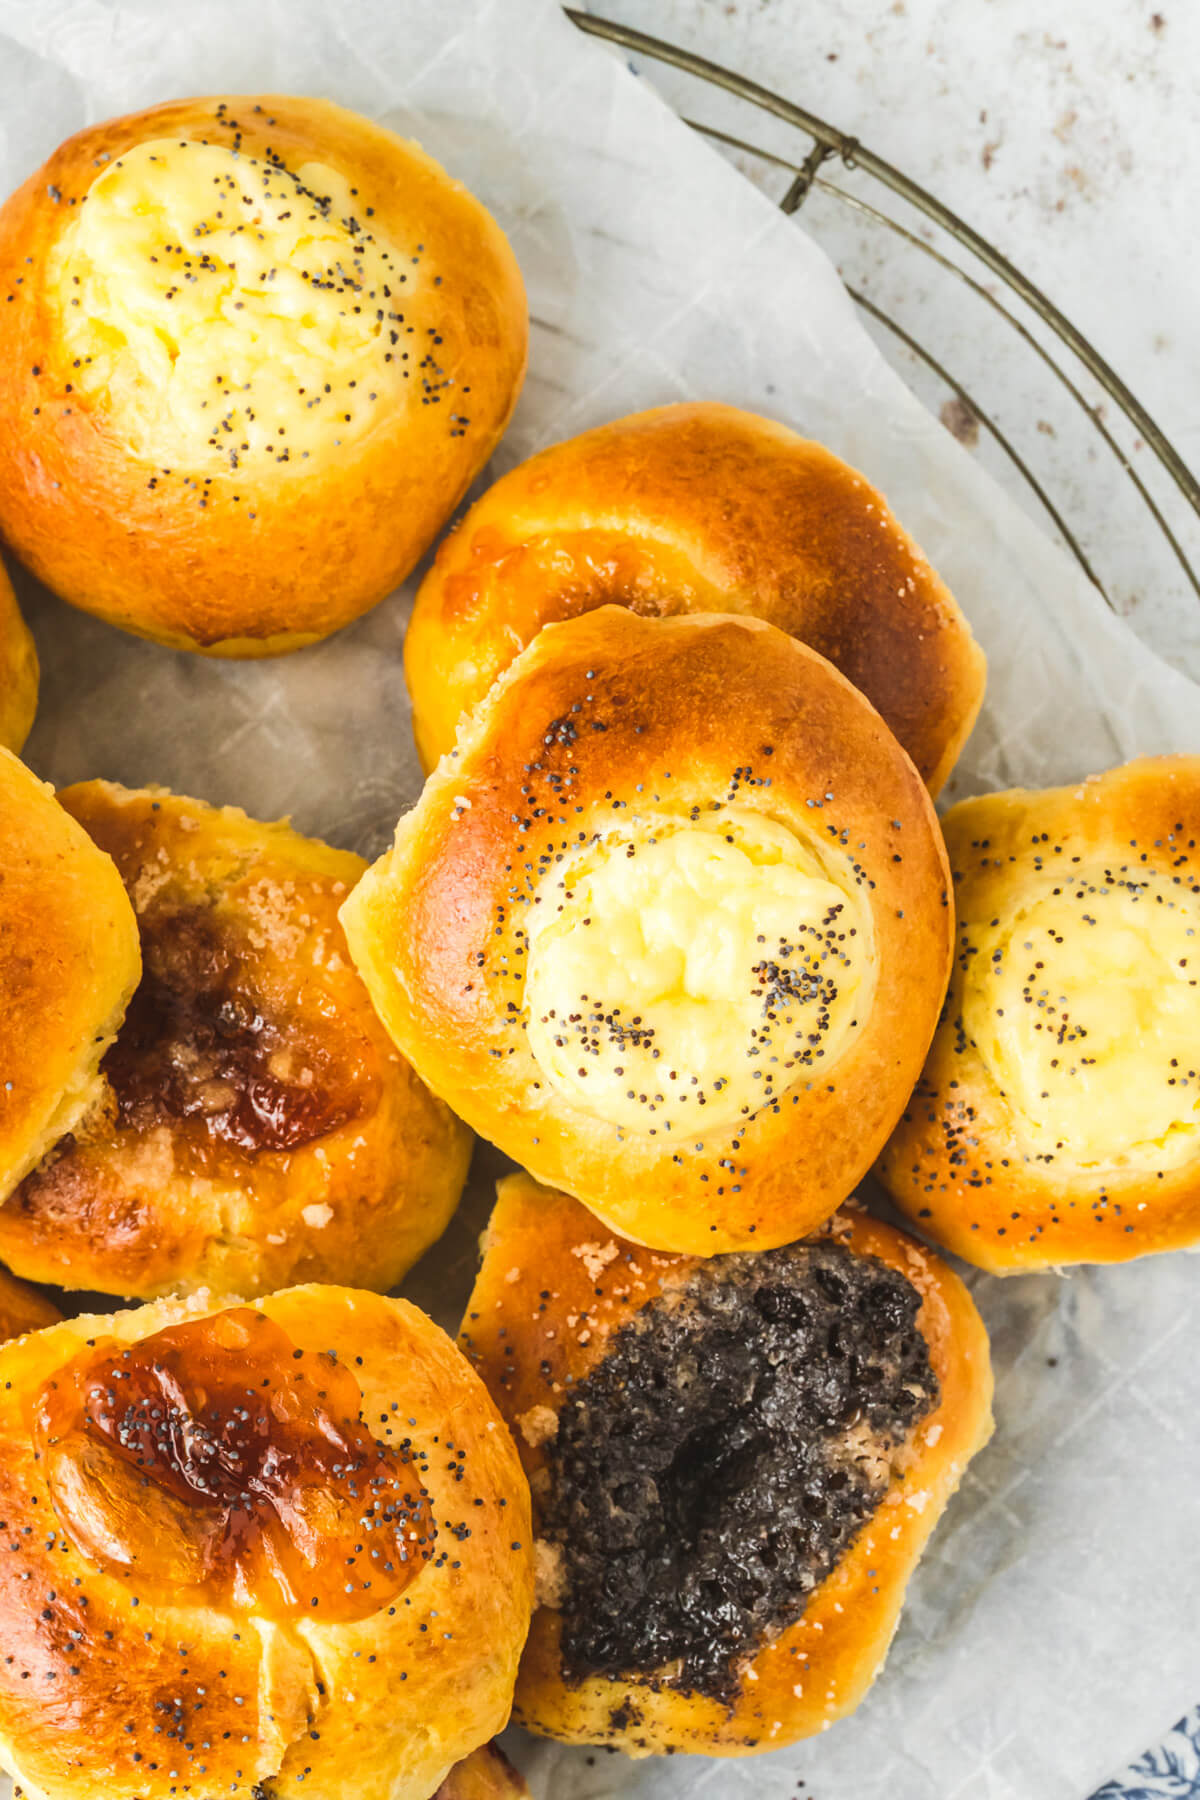 A platter of golden baked kolaches filled with a variety of fillings.